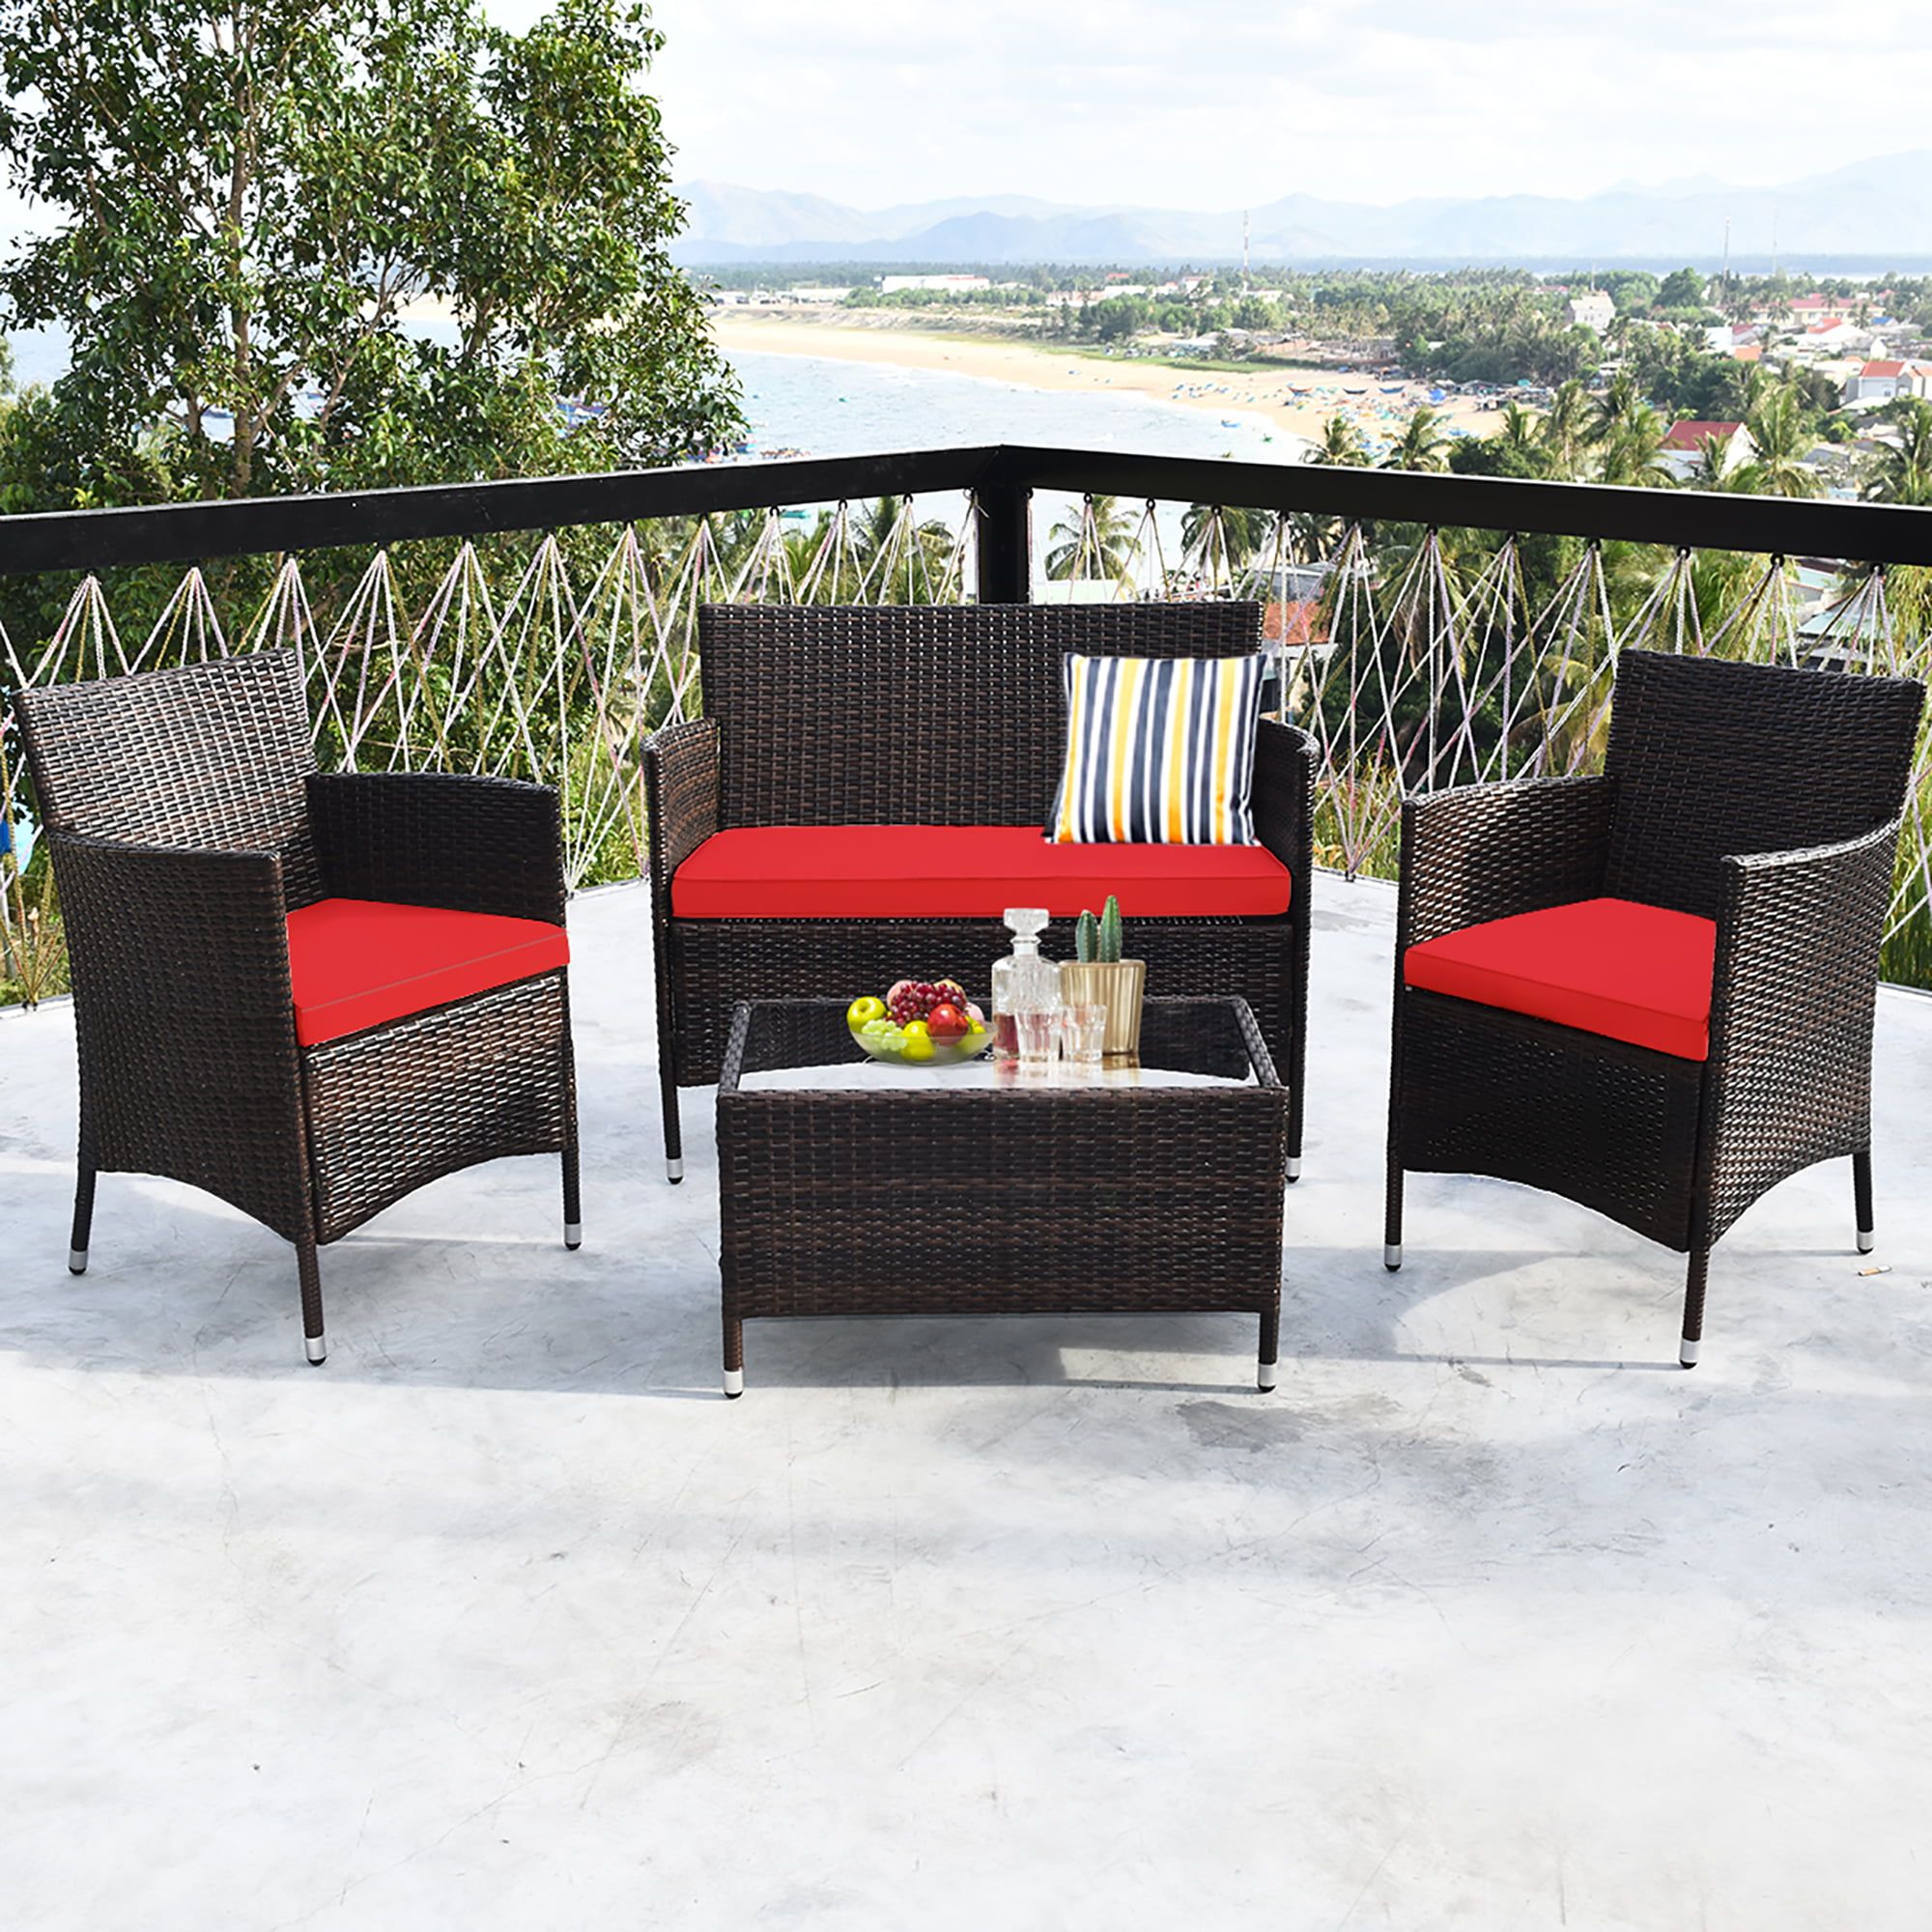 Costway 4pcs Rattan Patio Furniture Set Cushioned Sofa Chair Coffee With Regard To 4pcs Rattan Patio Coffee Tables (View 3 of 15)